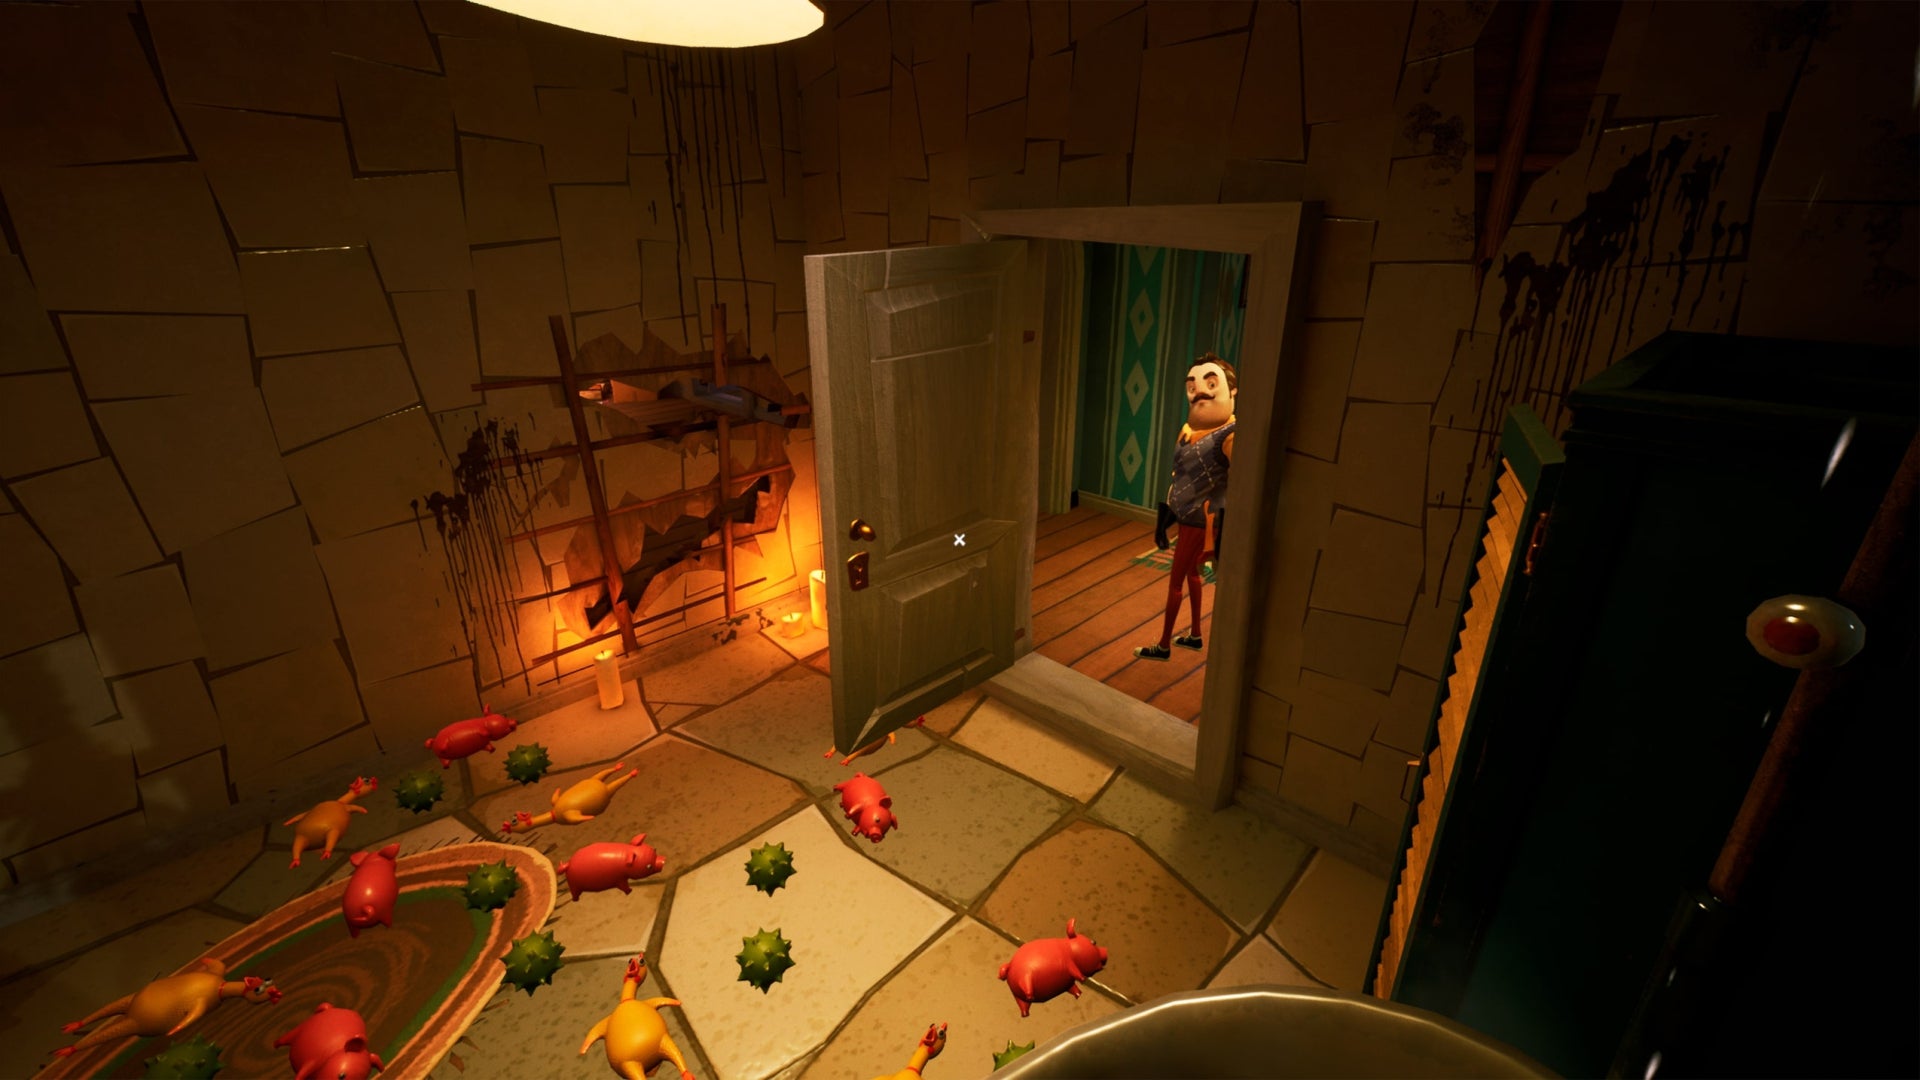 Theodore Peterson, in the Hello Neighbour 2 demo, looks into a bathroom with a floor covered in... pig statues of sorts?